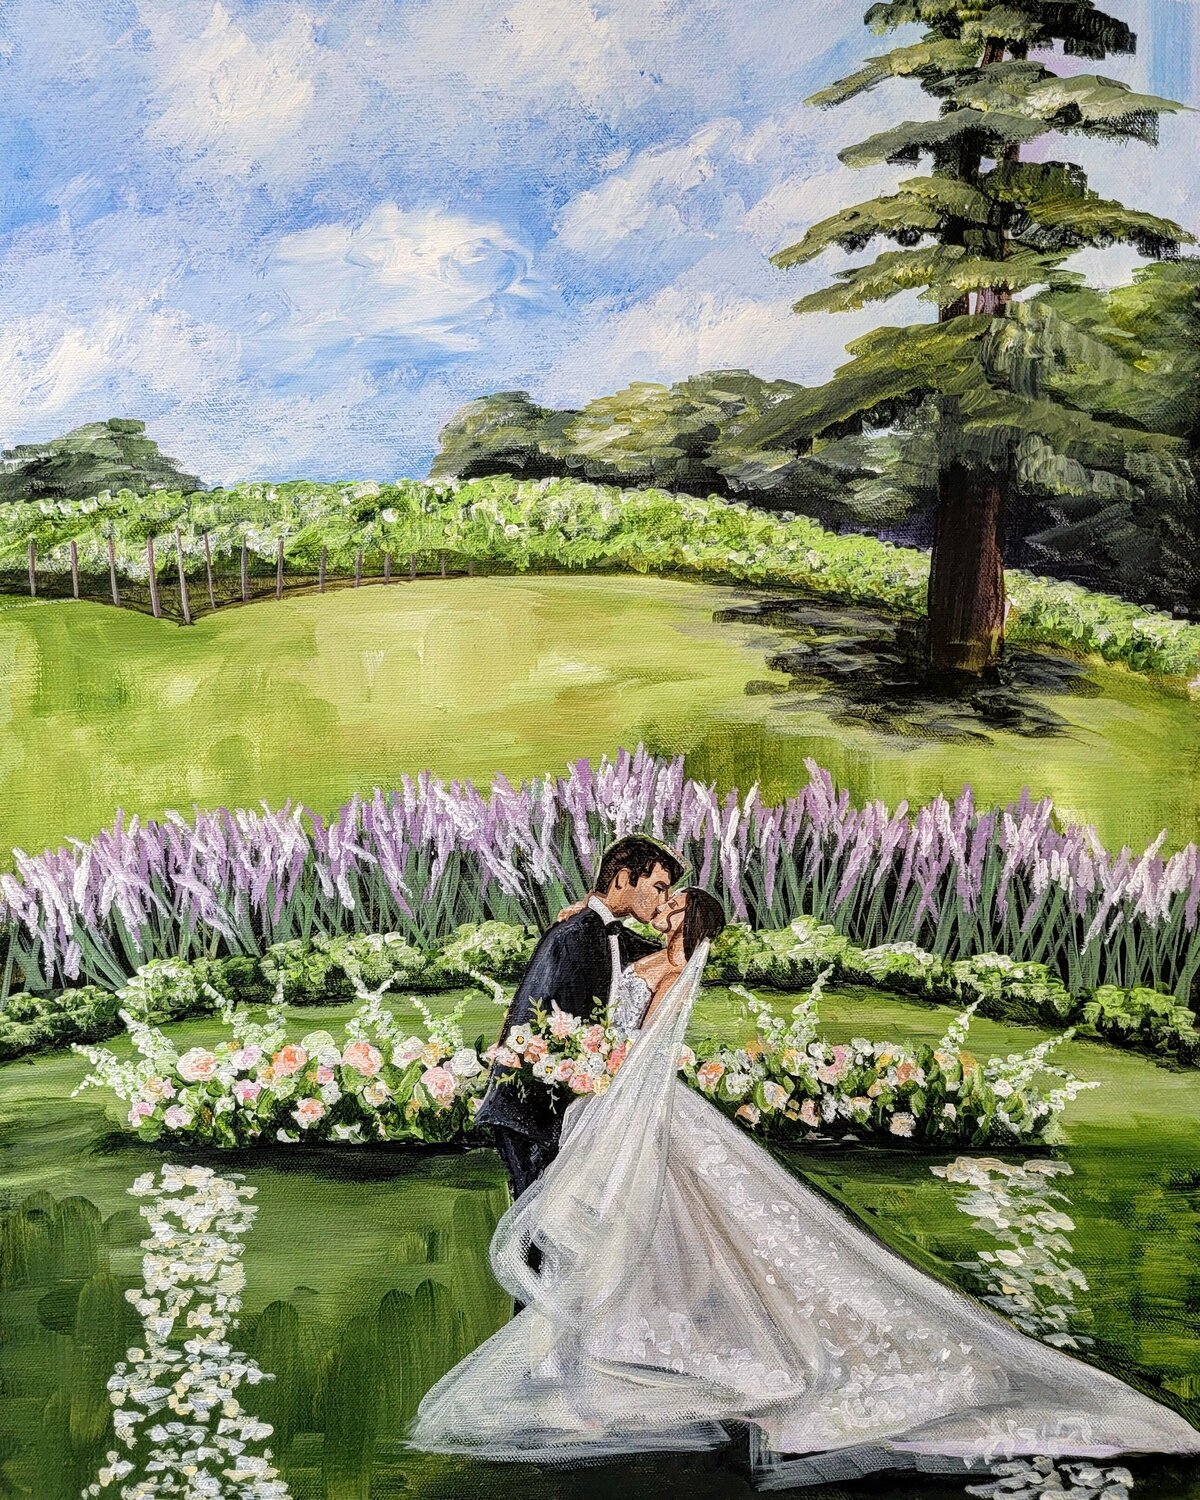 Spring vineyard wedding and first kiss painting giving me all of the Napa Valley and Sonoma CA vibes